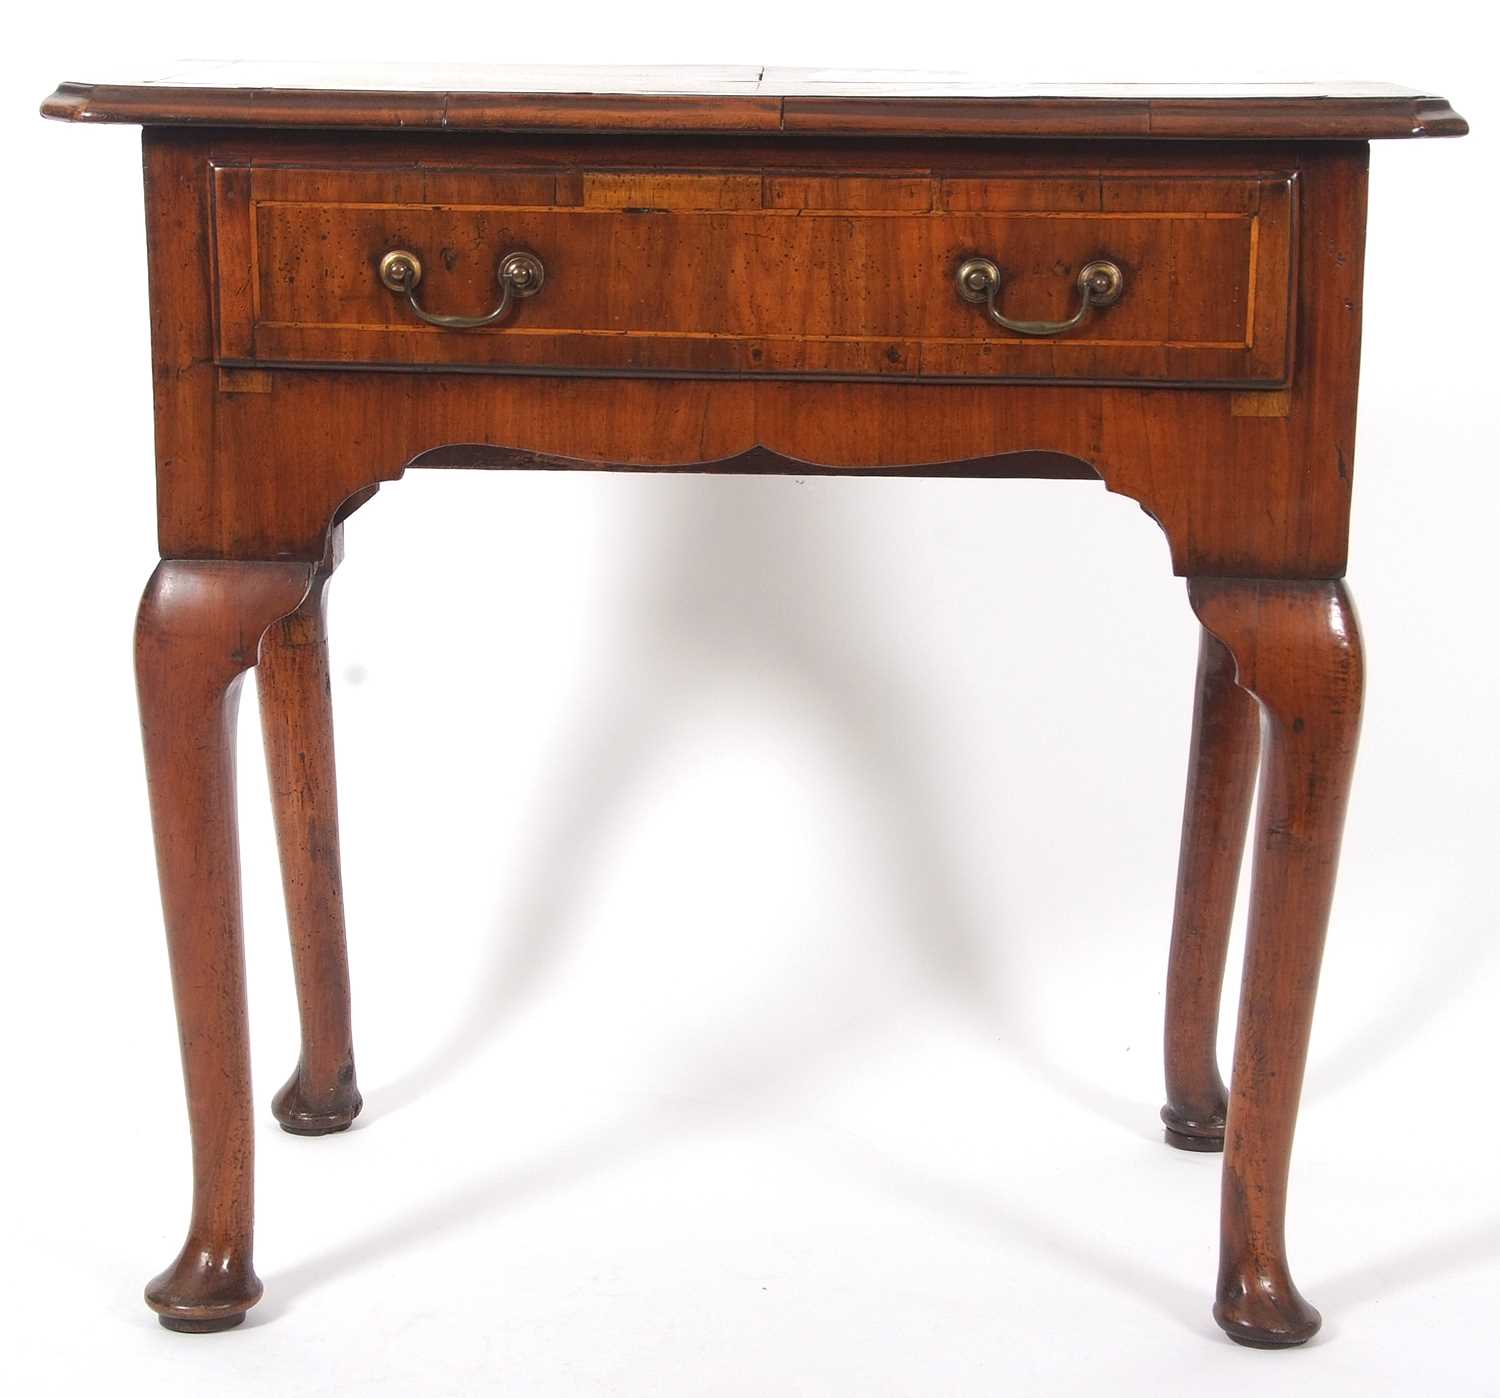 An early 18th Century walnut low boy, the top with quartered veneers and canted front corners over a - Image 8 of 10